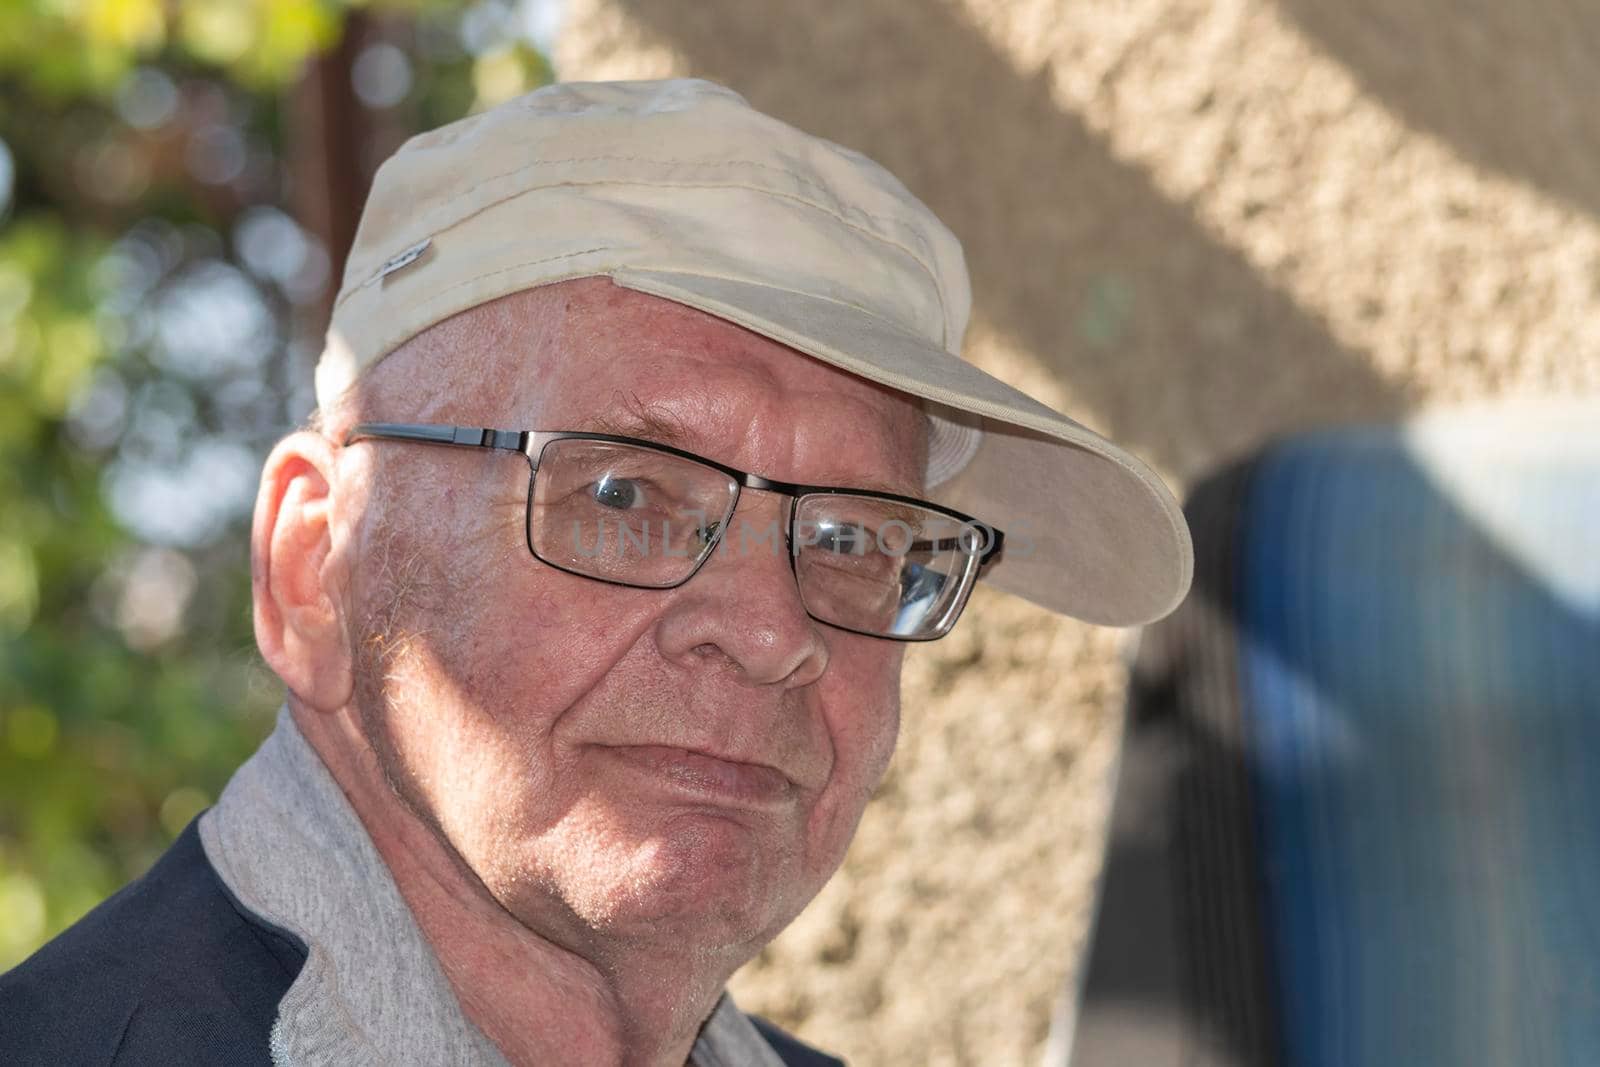 Old grandfather with glasses and brimmed straw hat. Looks into the camera on a sunny autumn day. by Essffes